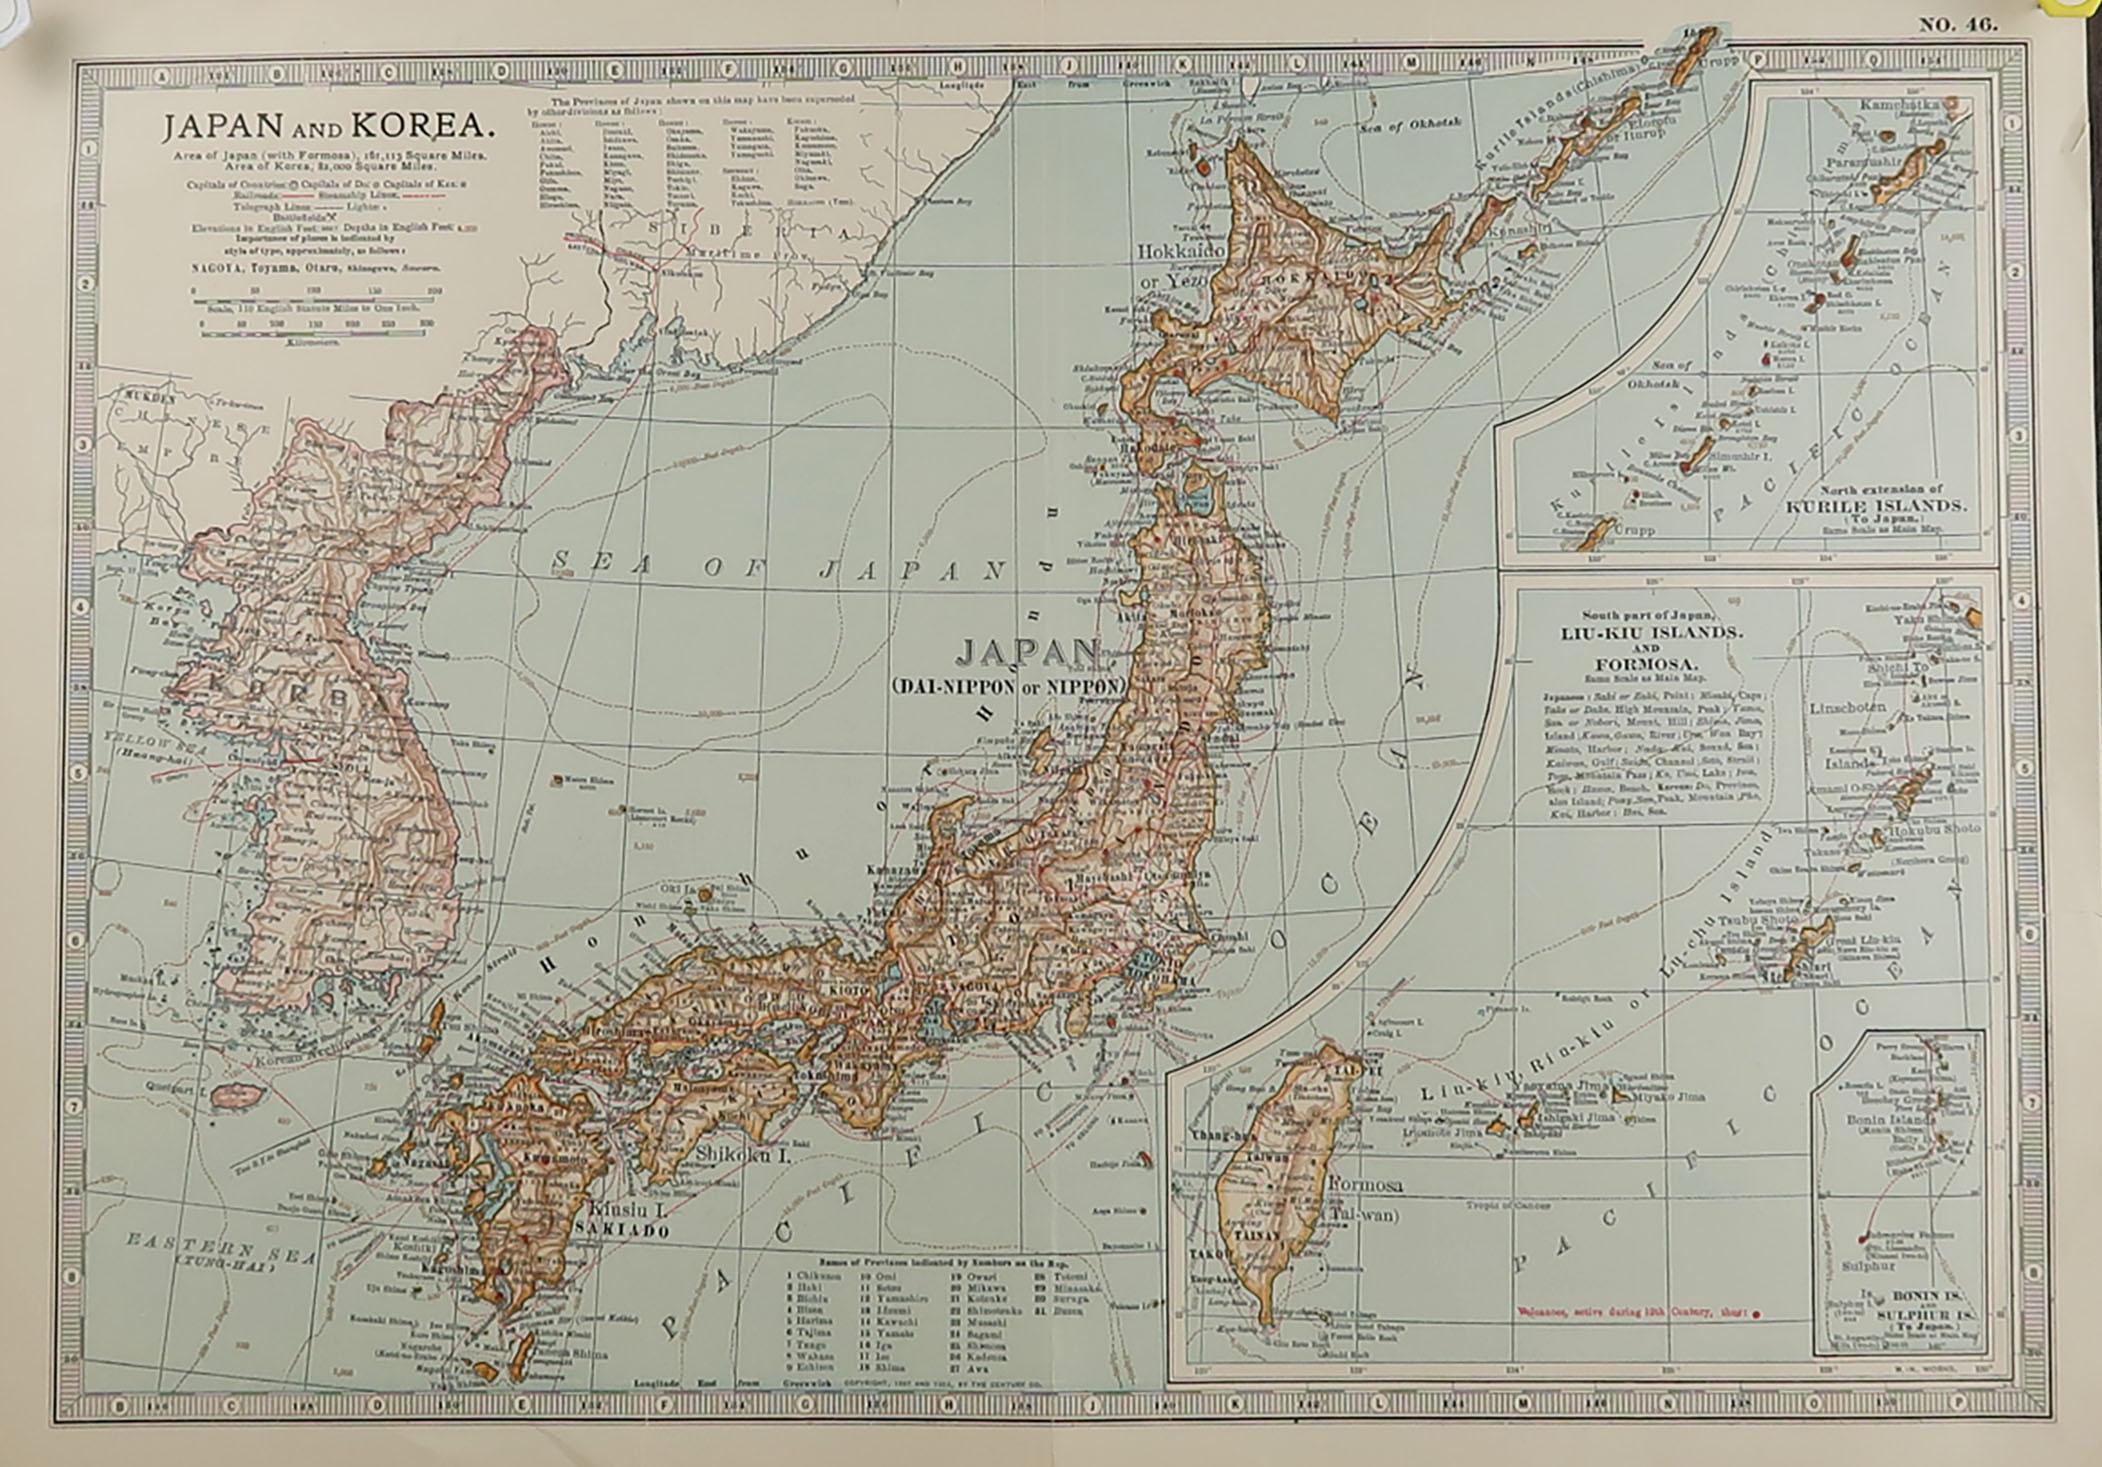 Great map of Japan and Korea

Original color.

Published, circa 1890

A couple of minor edge tears. Minor creasing.

Unframed.
       